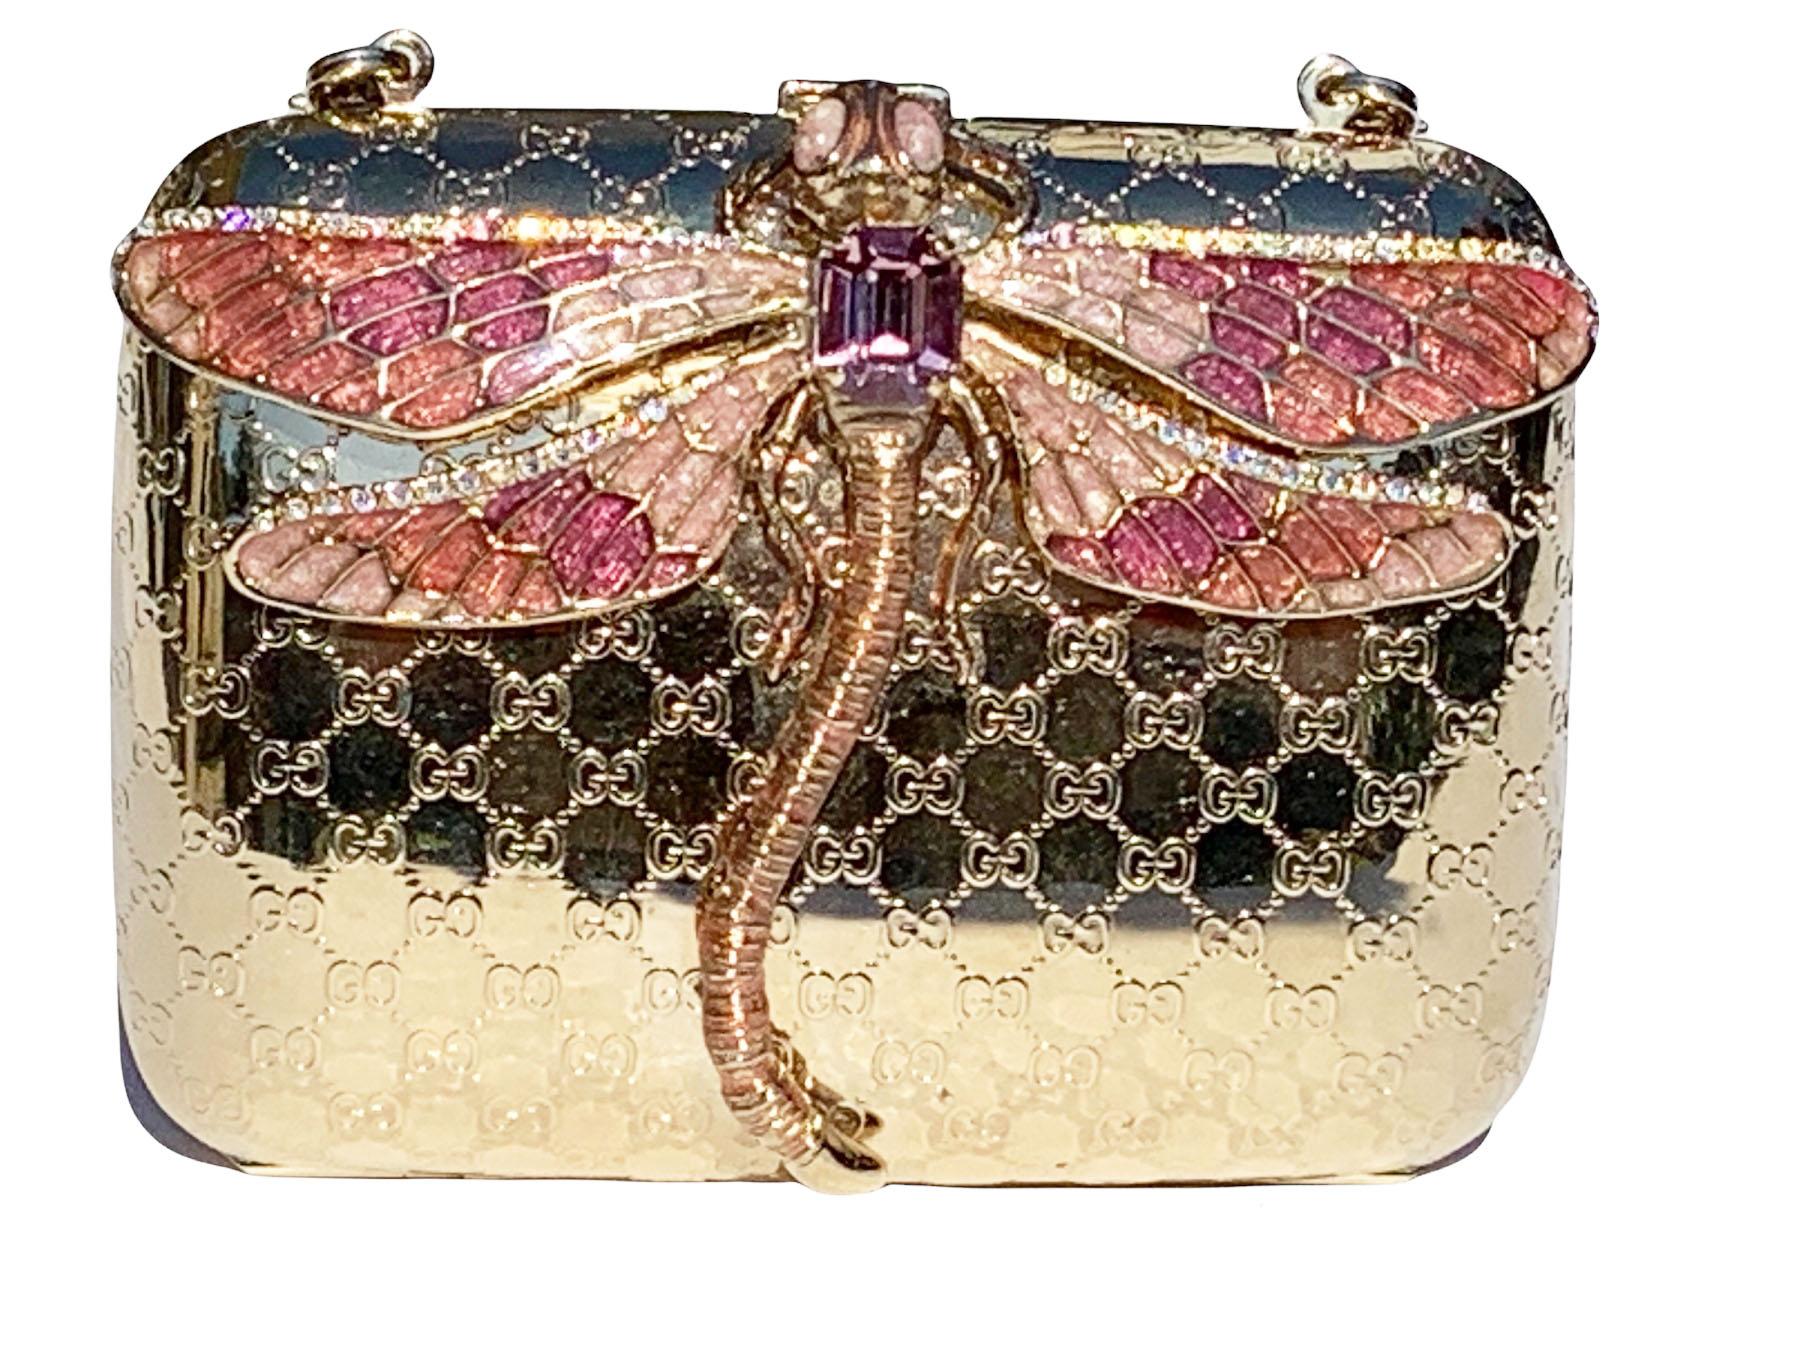 Tom Ford for Gucci Gold Dragonfly Minaudiere in Micro Guccissima Embossed Gold tone Metal and Enamel
2000